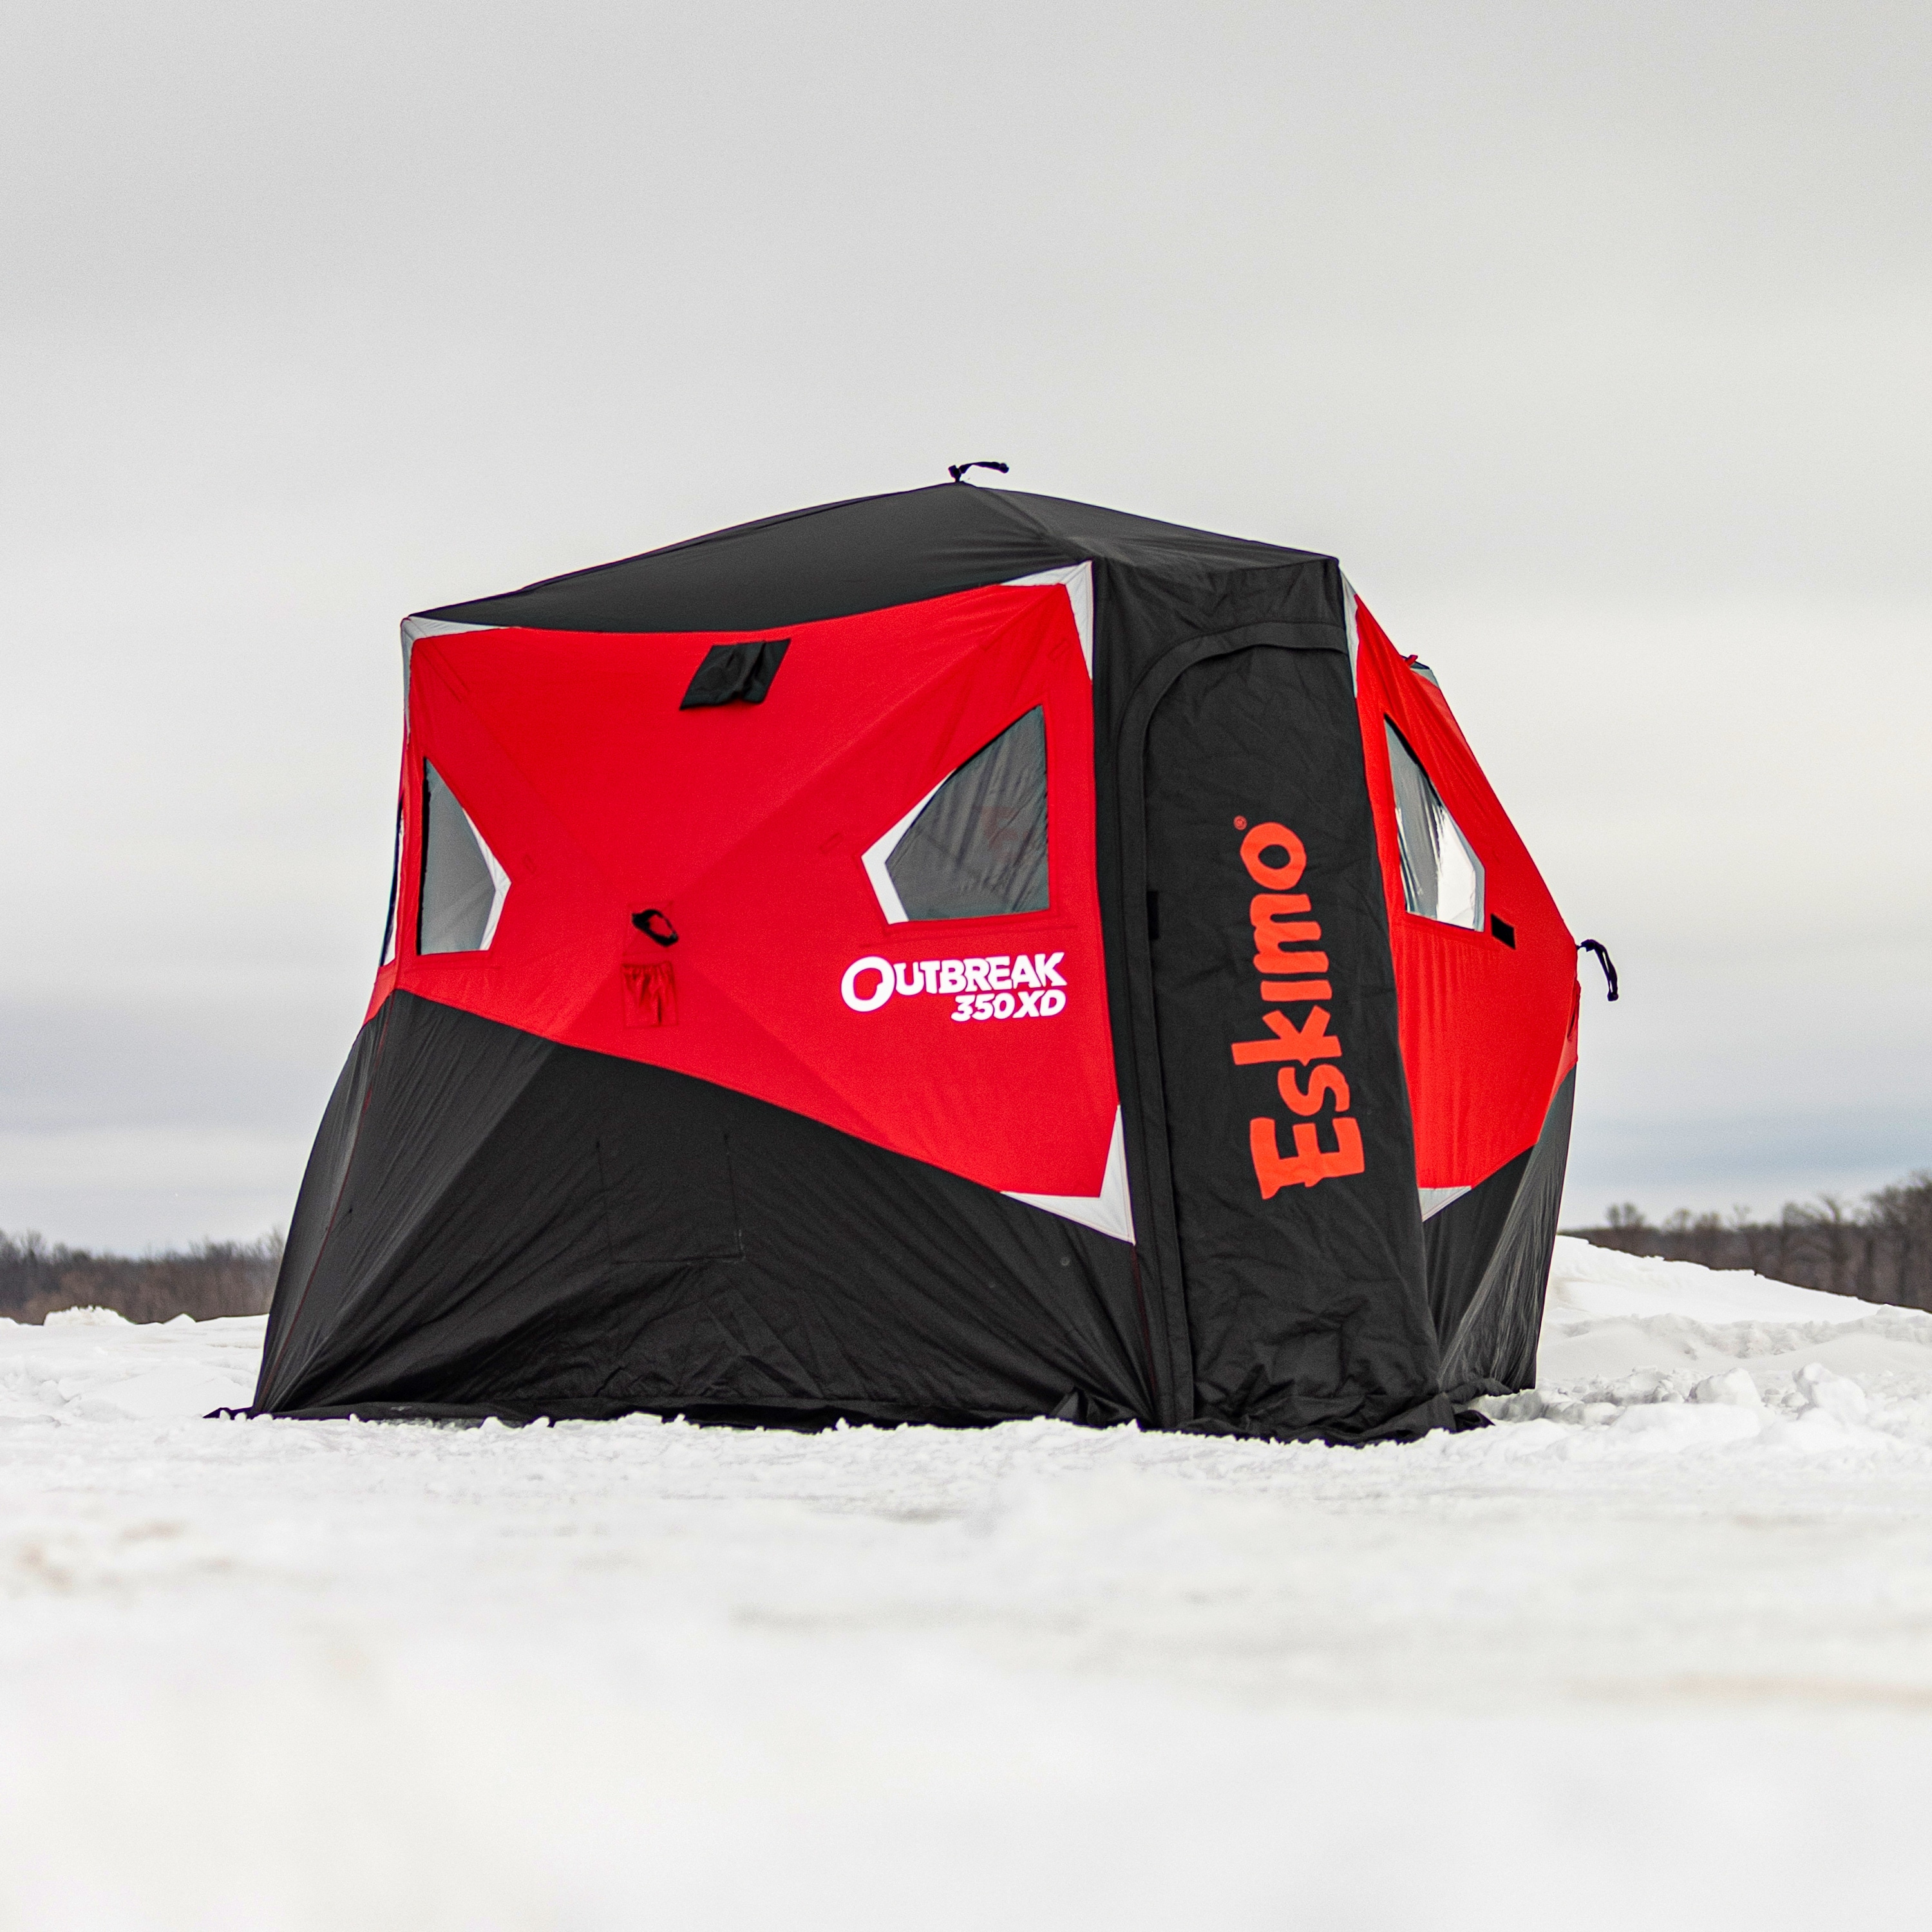 Eskimo Outbreak 450XD Portable Ice Shelter Fishing Storage Cabinet in the  Fishing Equipment department at